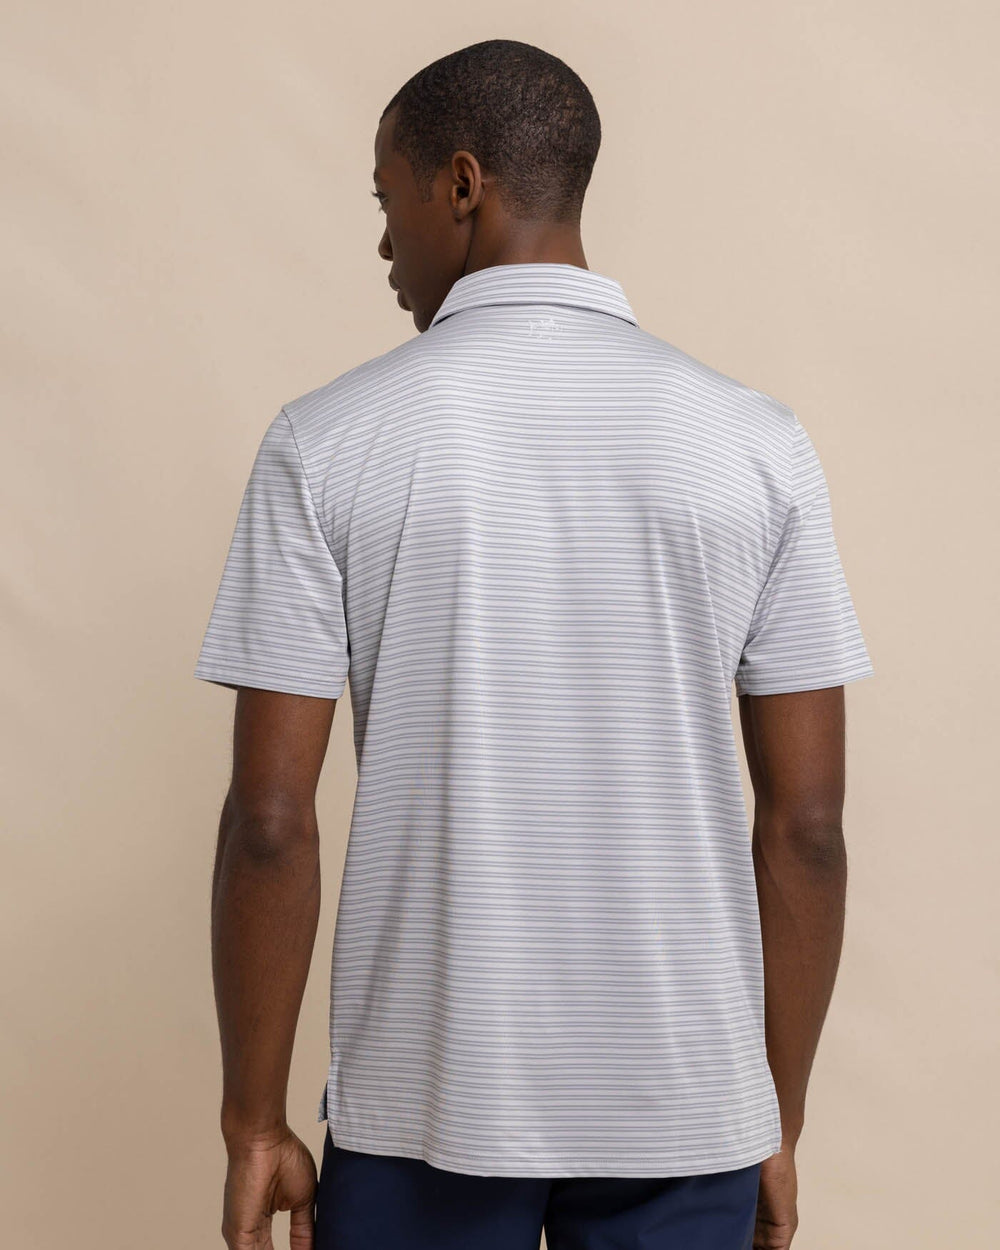 The back view of the Southern Tide Driver Baywoods Stripe Polo by Southern Tide - Platinum Grey